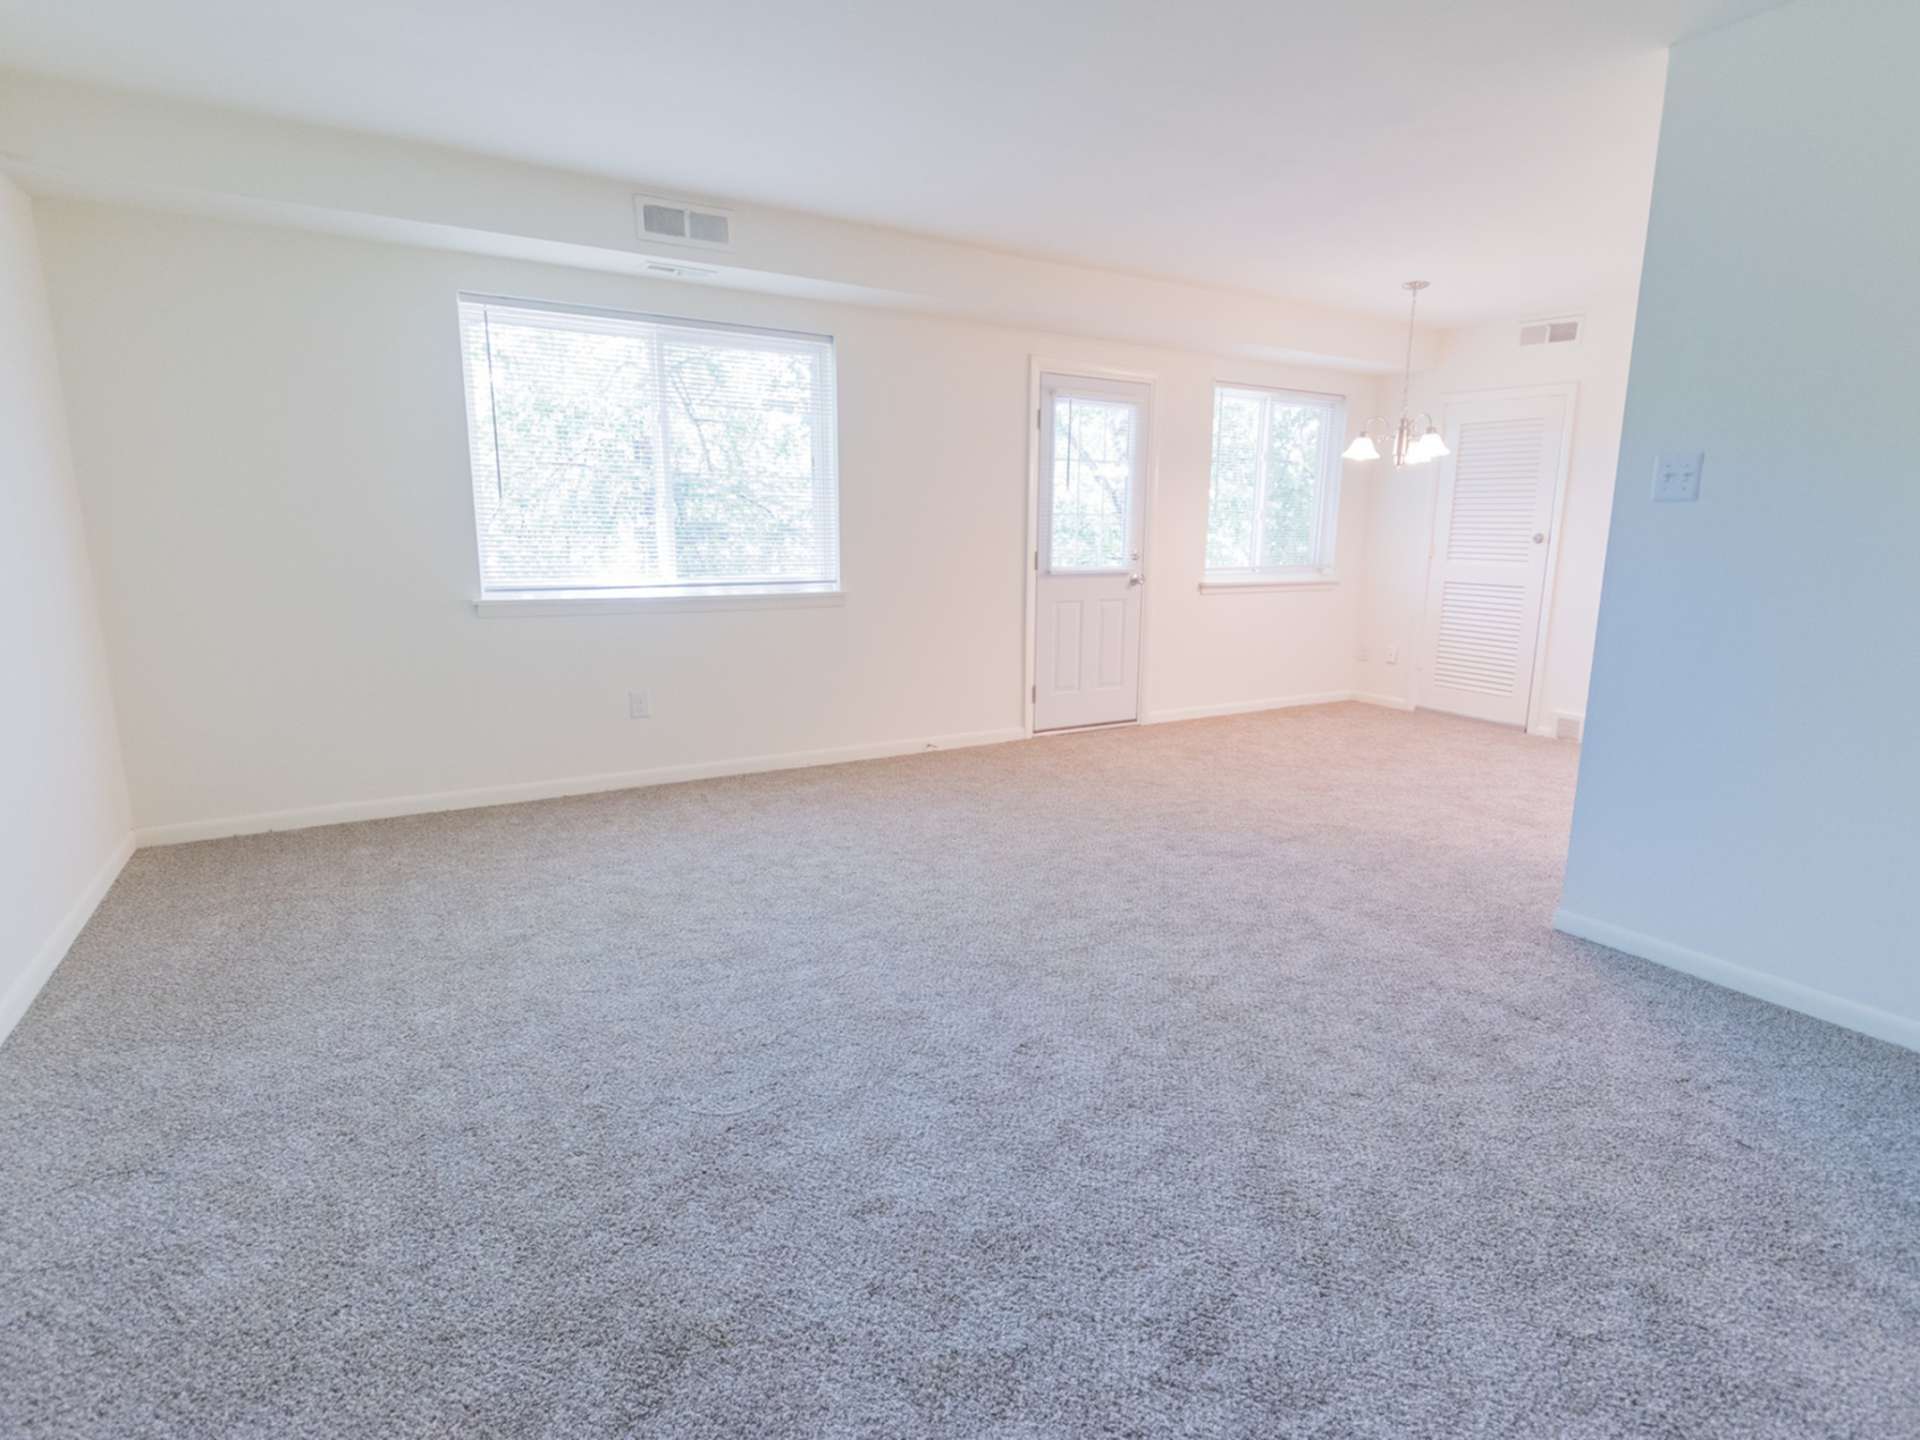 Spacious living area with a hanging light, two large windows, and light grey carpeting.